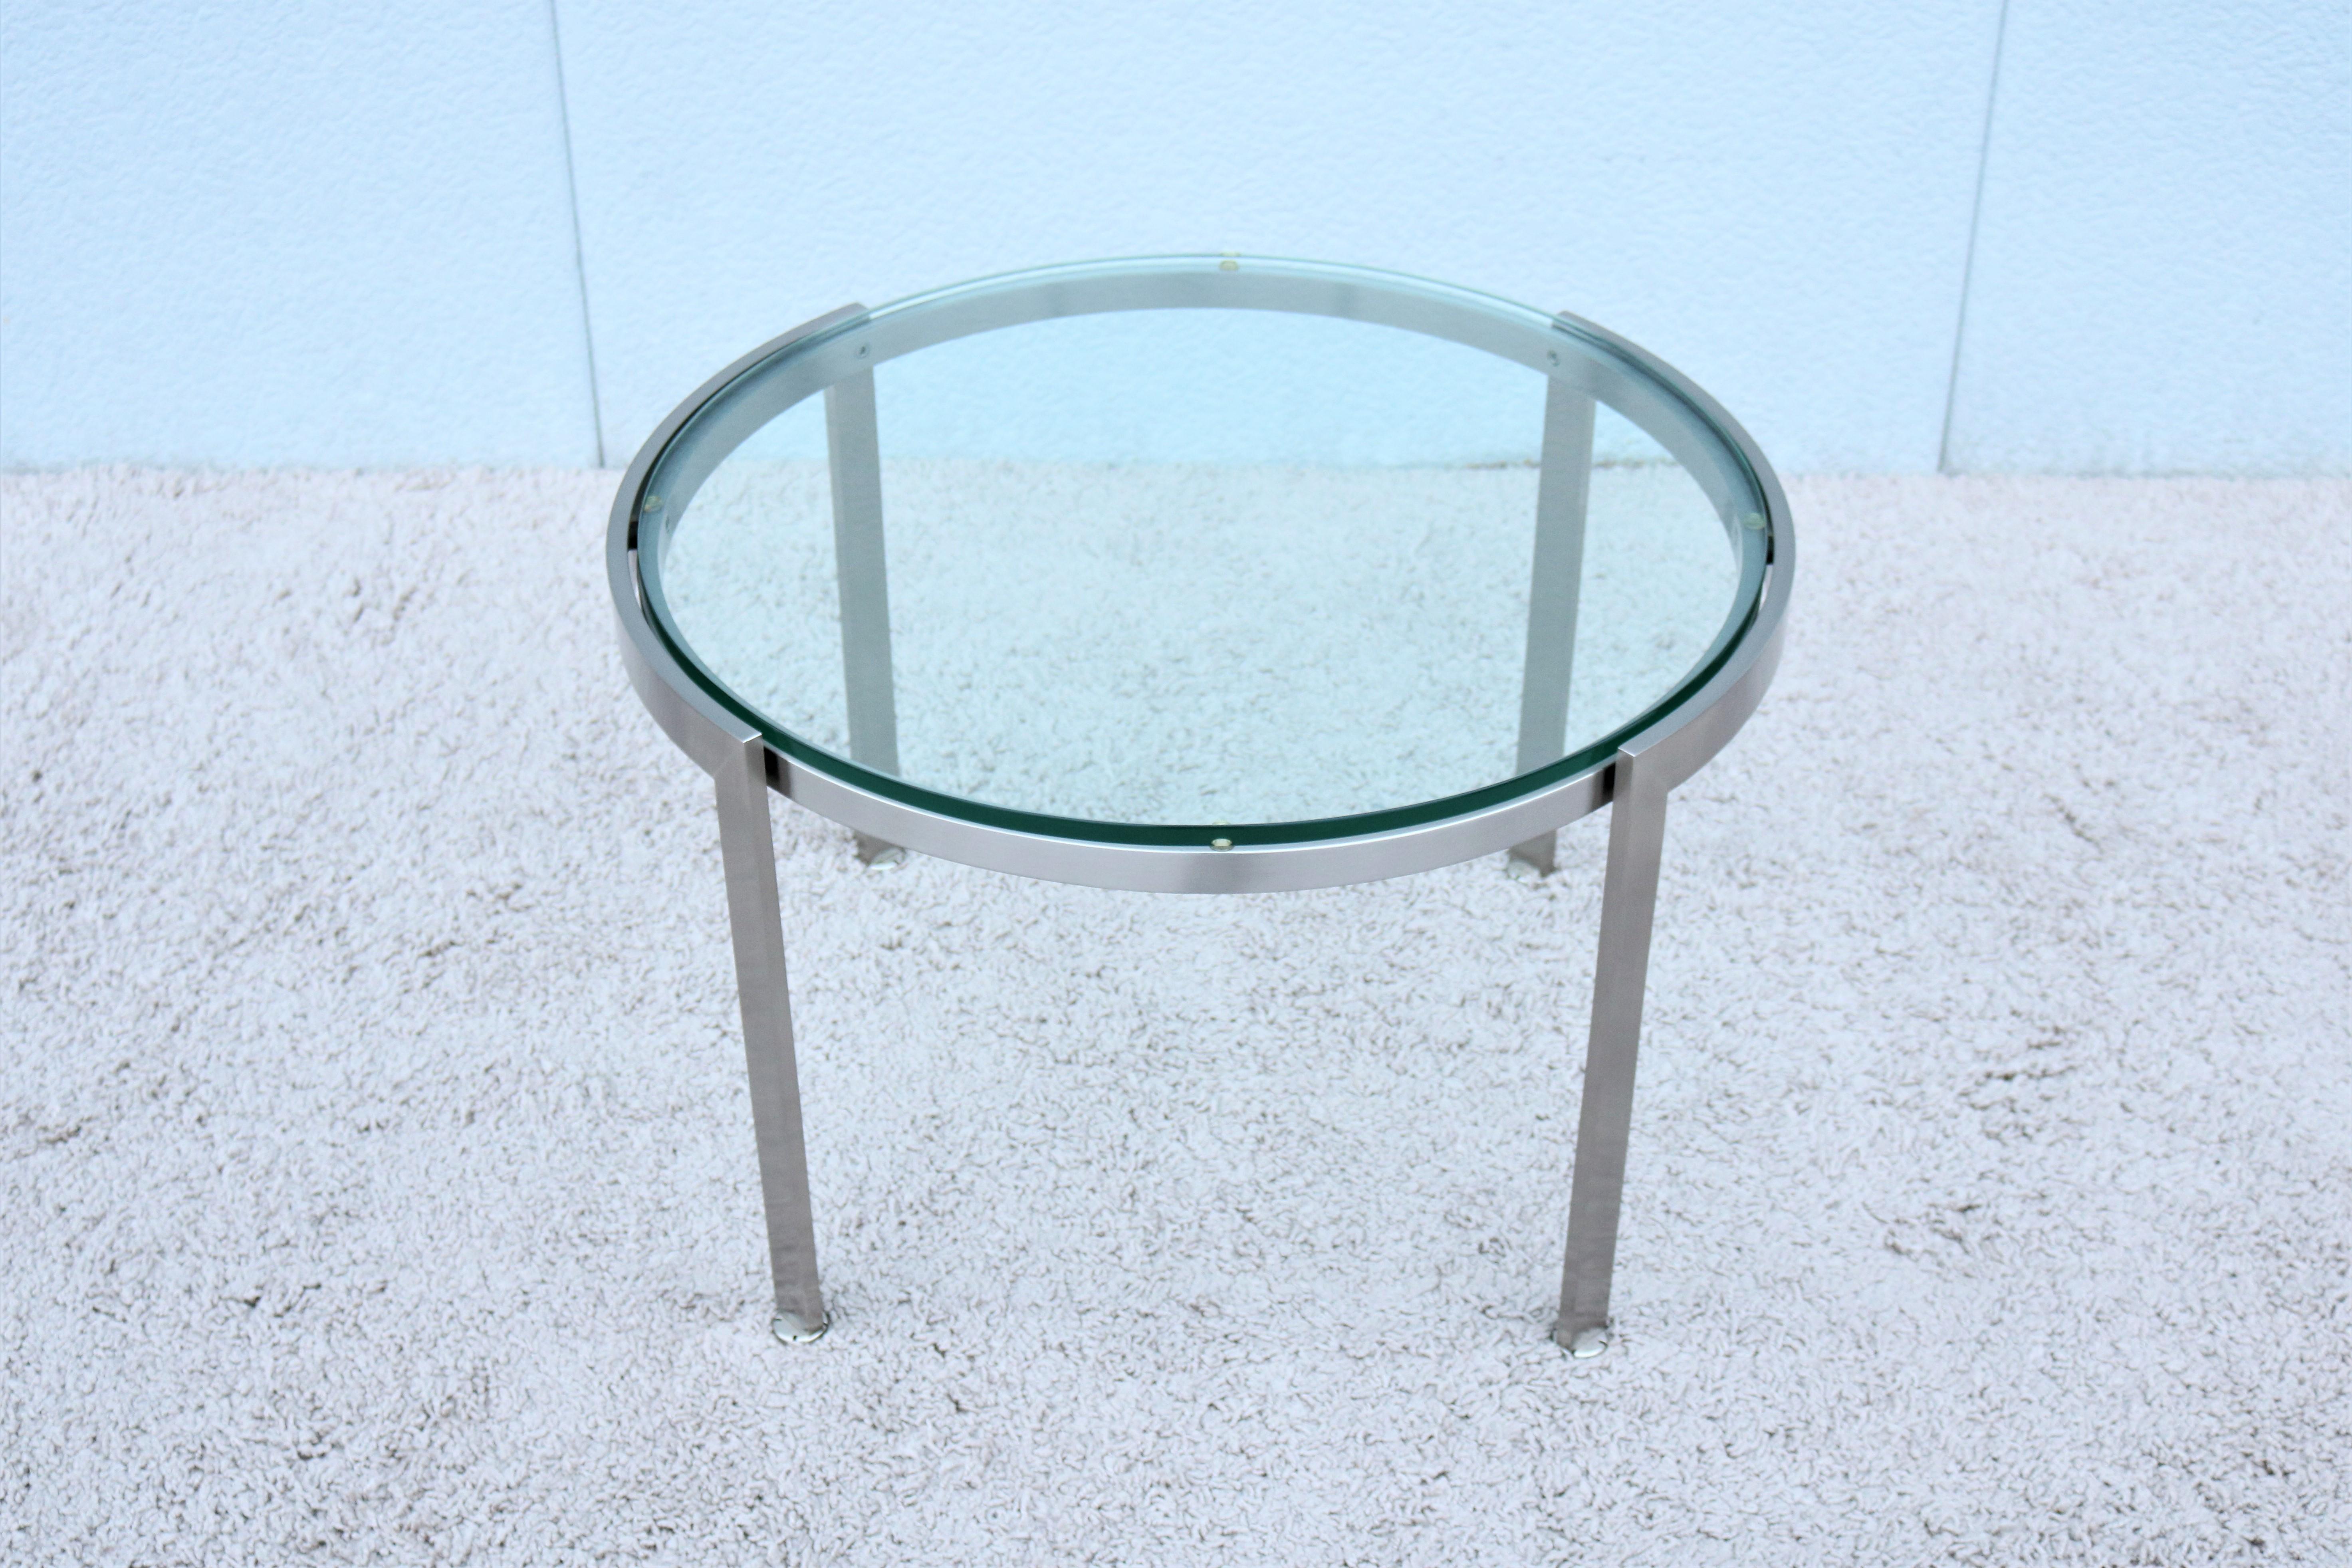 High-End quality Metal Series round occasional table by Geiger International, the beautifully Modern Minimalistic design with simple clean lines and elegant materials make this table flow with grace in any period or style environment and among